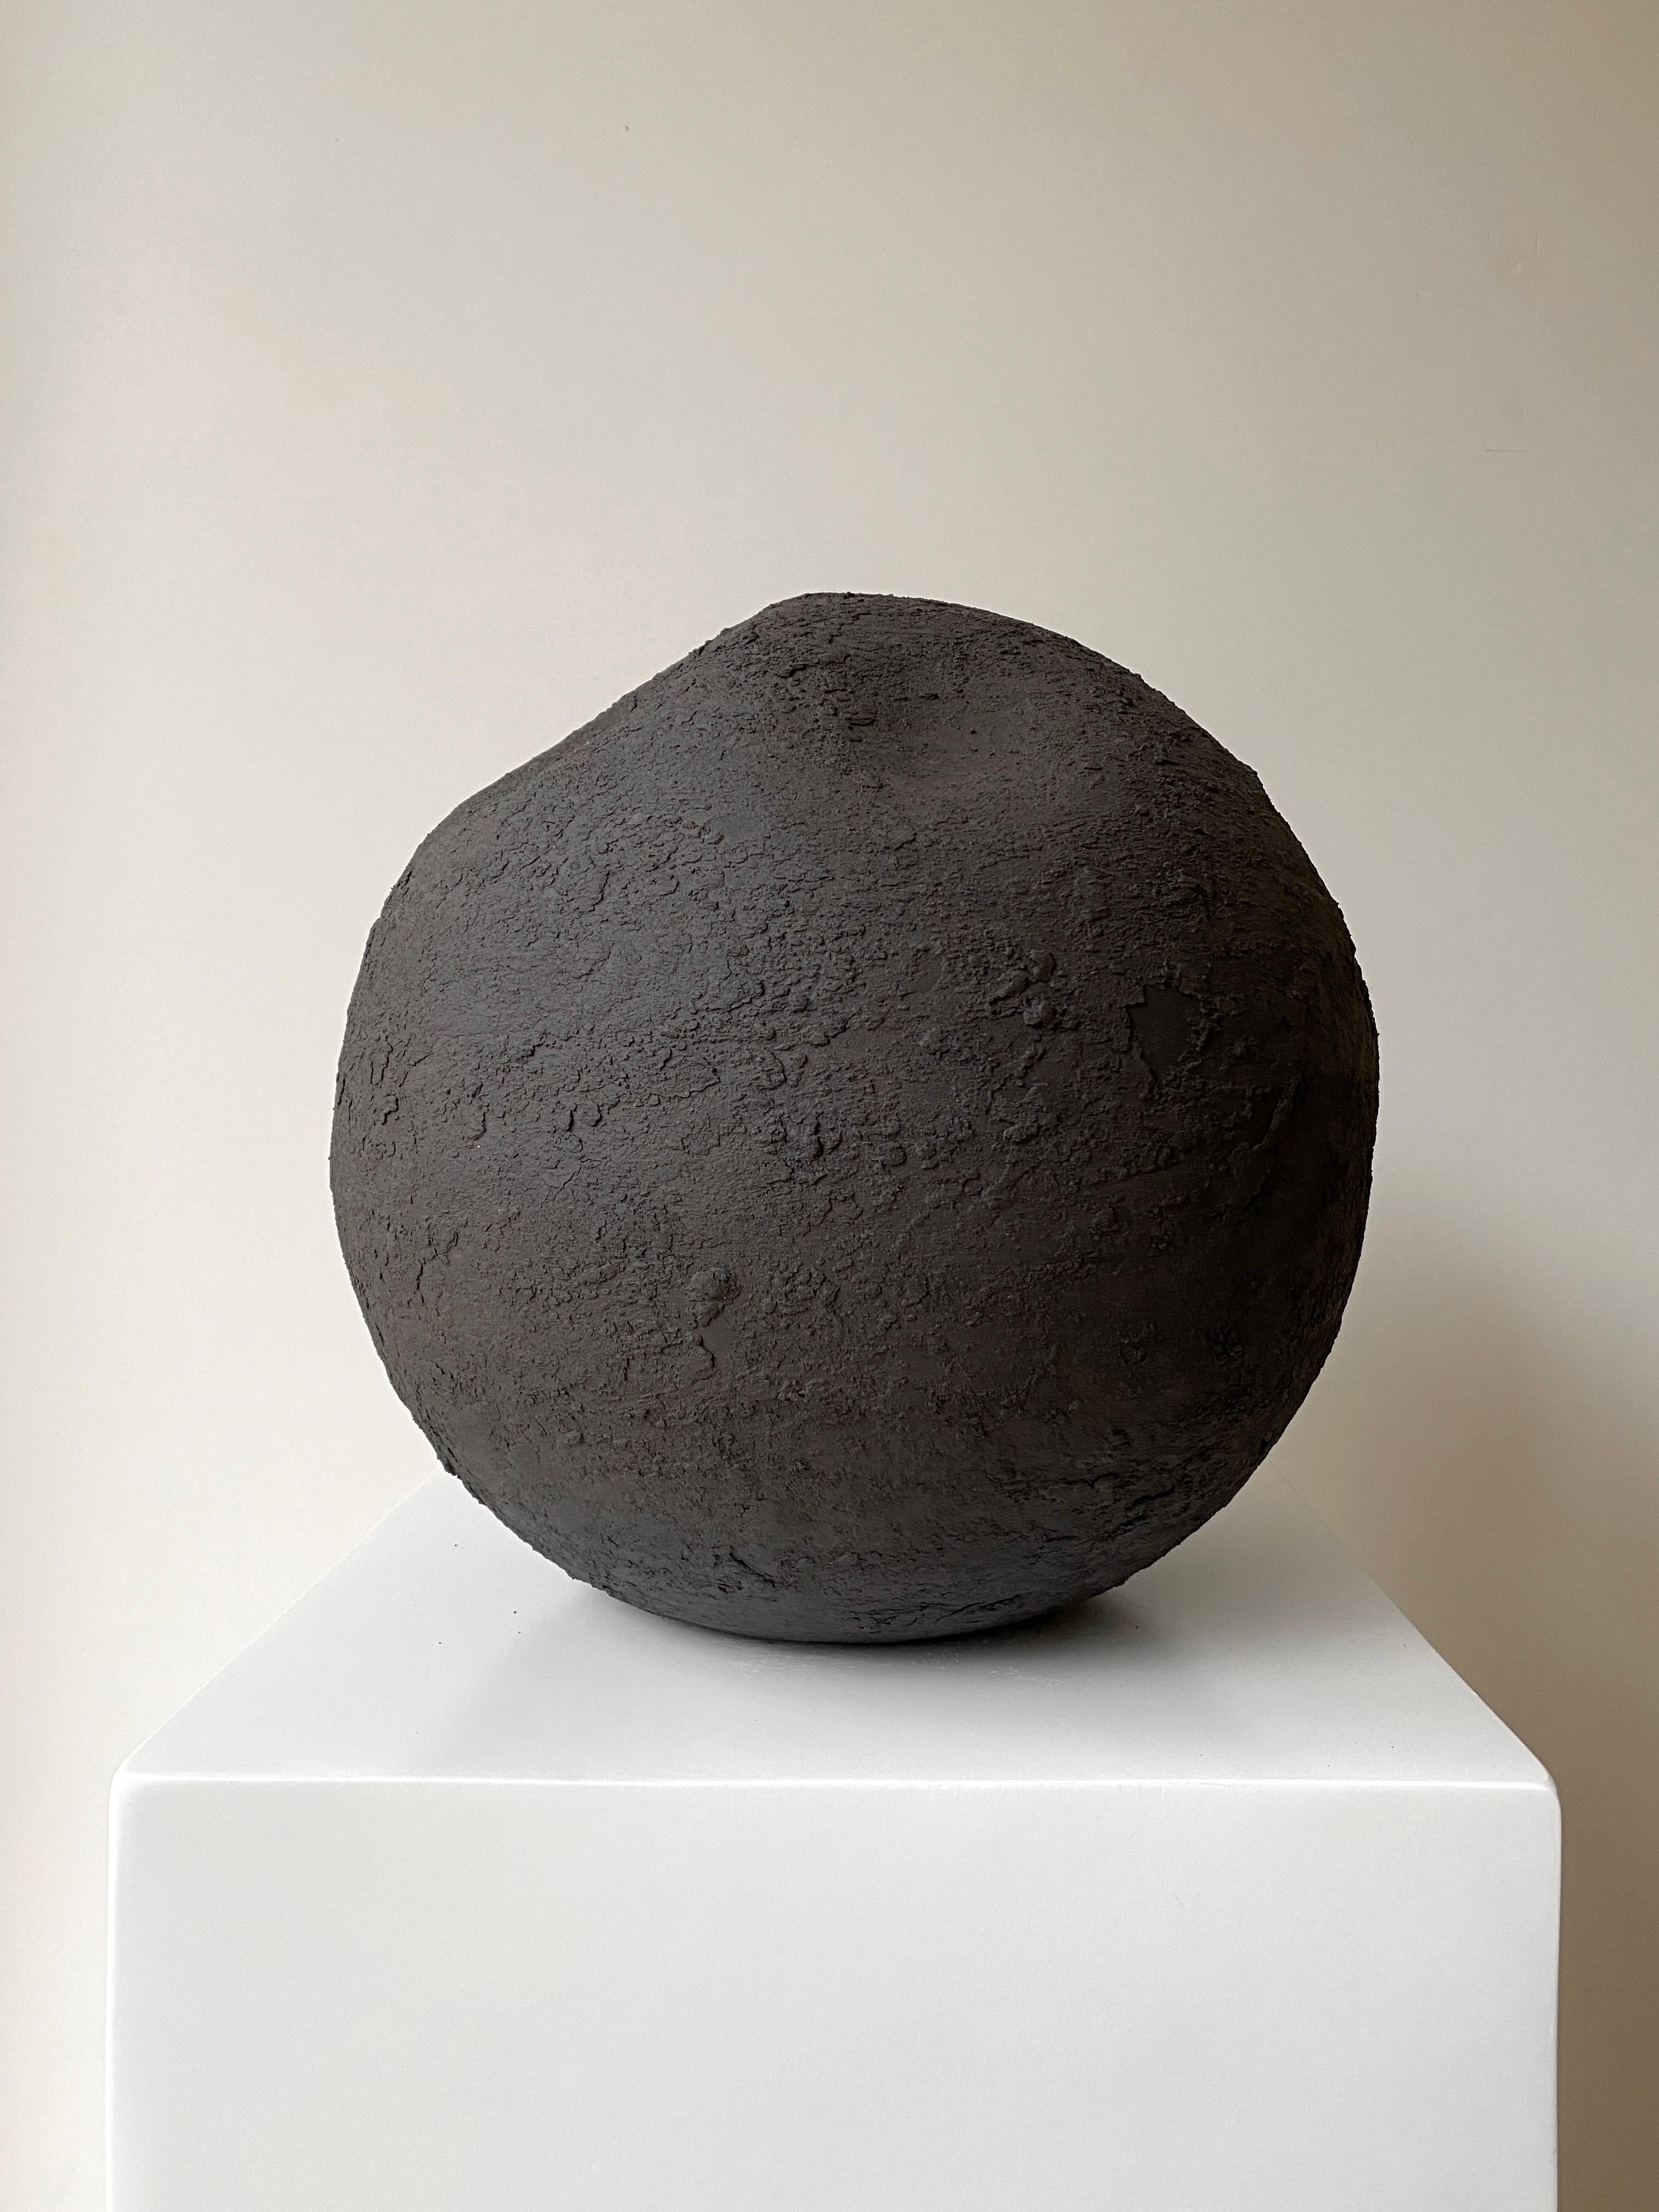 Black rock soft moon by Laura Pasquino
Dimensions: Ø 33 x H 32 cm, opening Ø 3 cm
Materials: stoneware ceramic
Finishing: unglazed natural stoneware
Colour: black
Laura Pasquino
Incorporating references from ancient Korean ceramics as well as